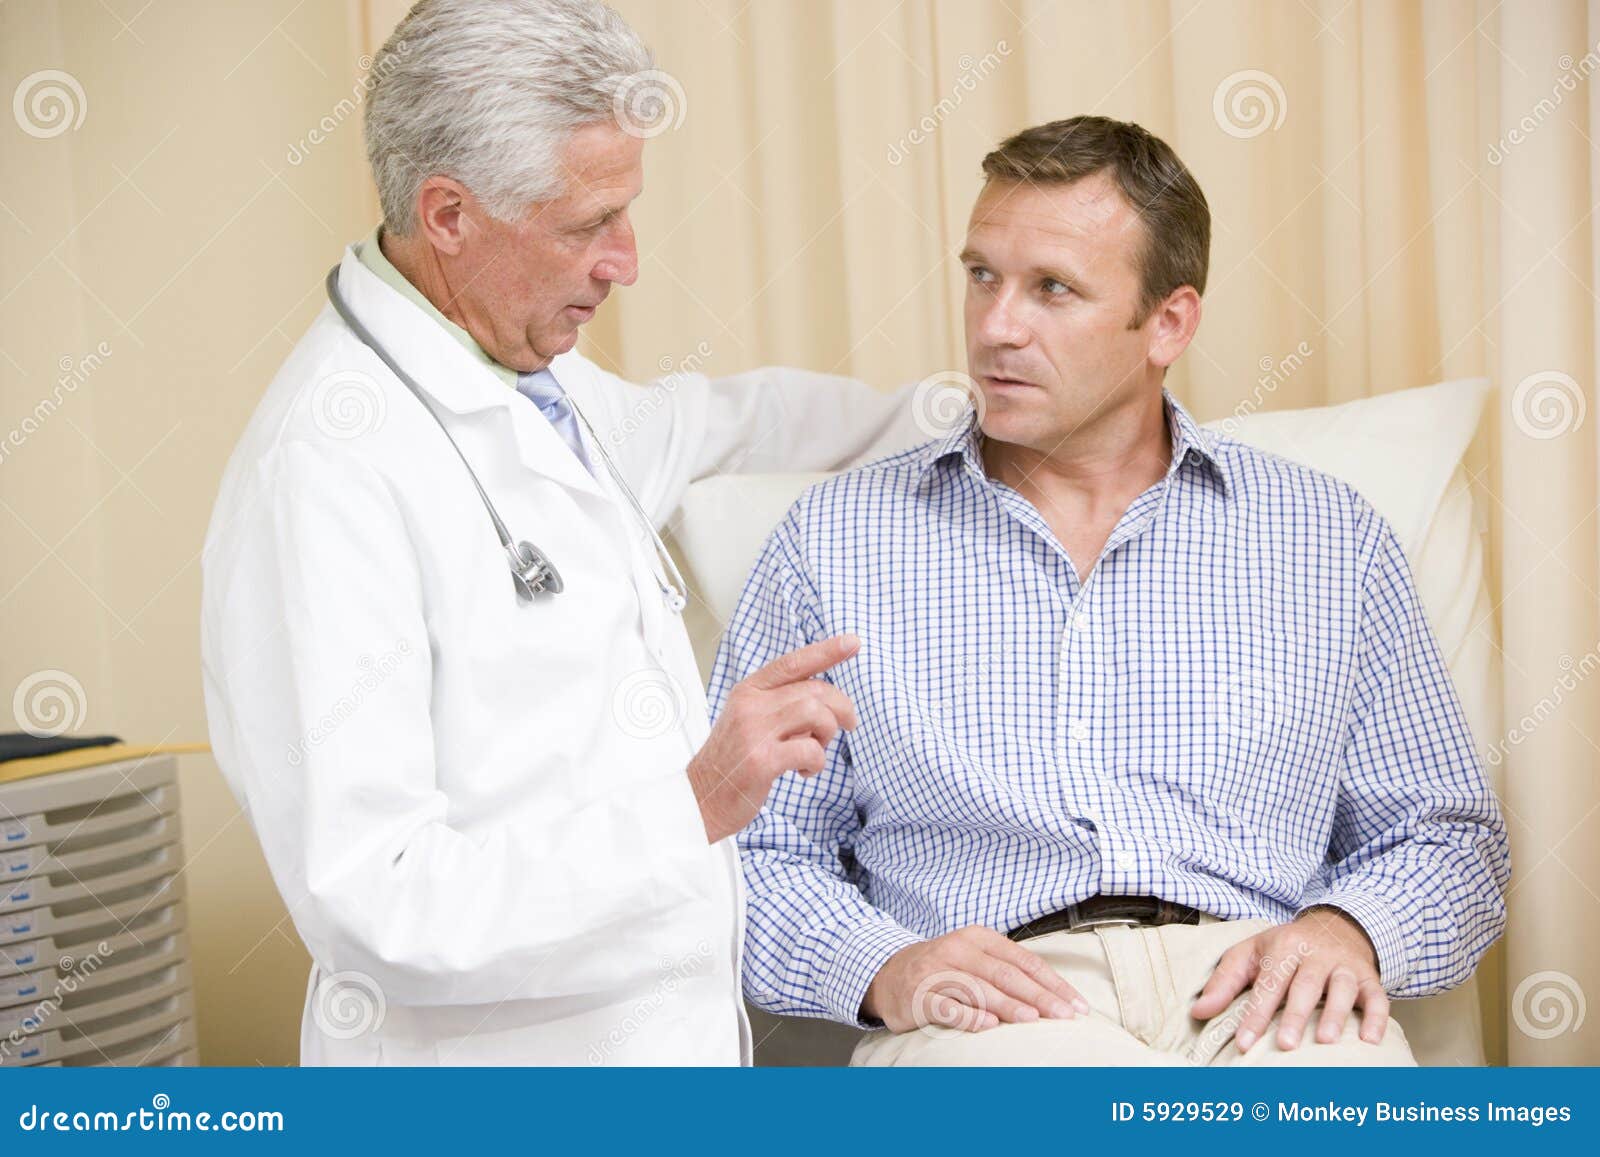 doctor giving man checkup in exam room